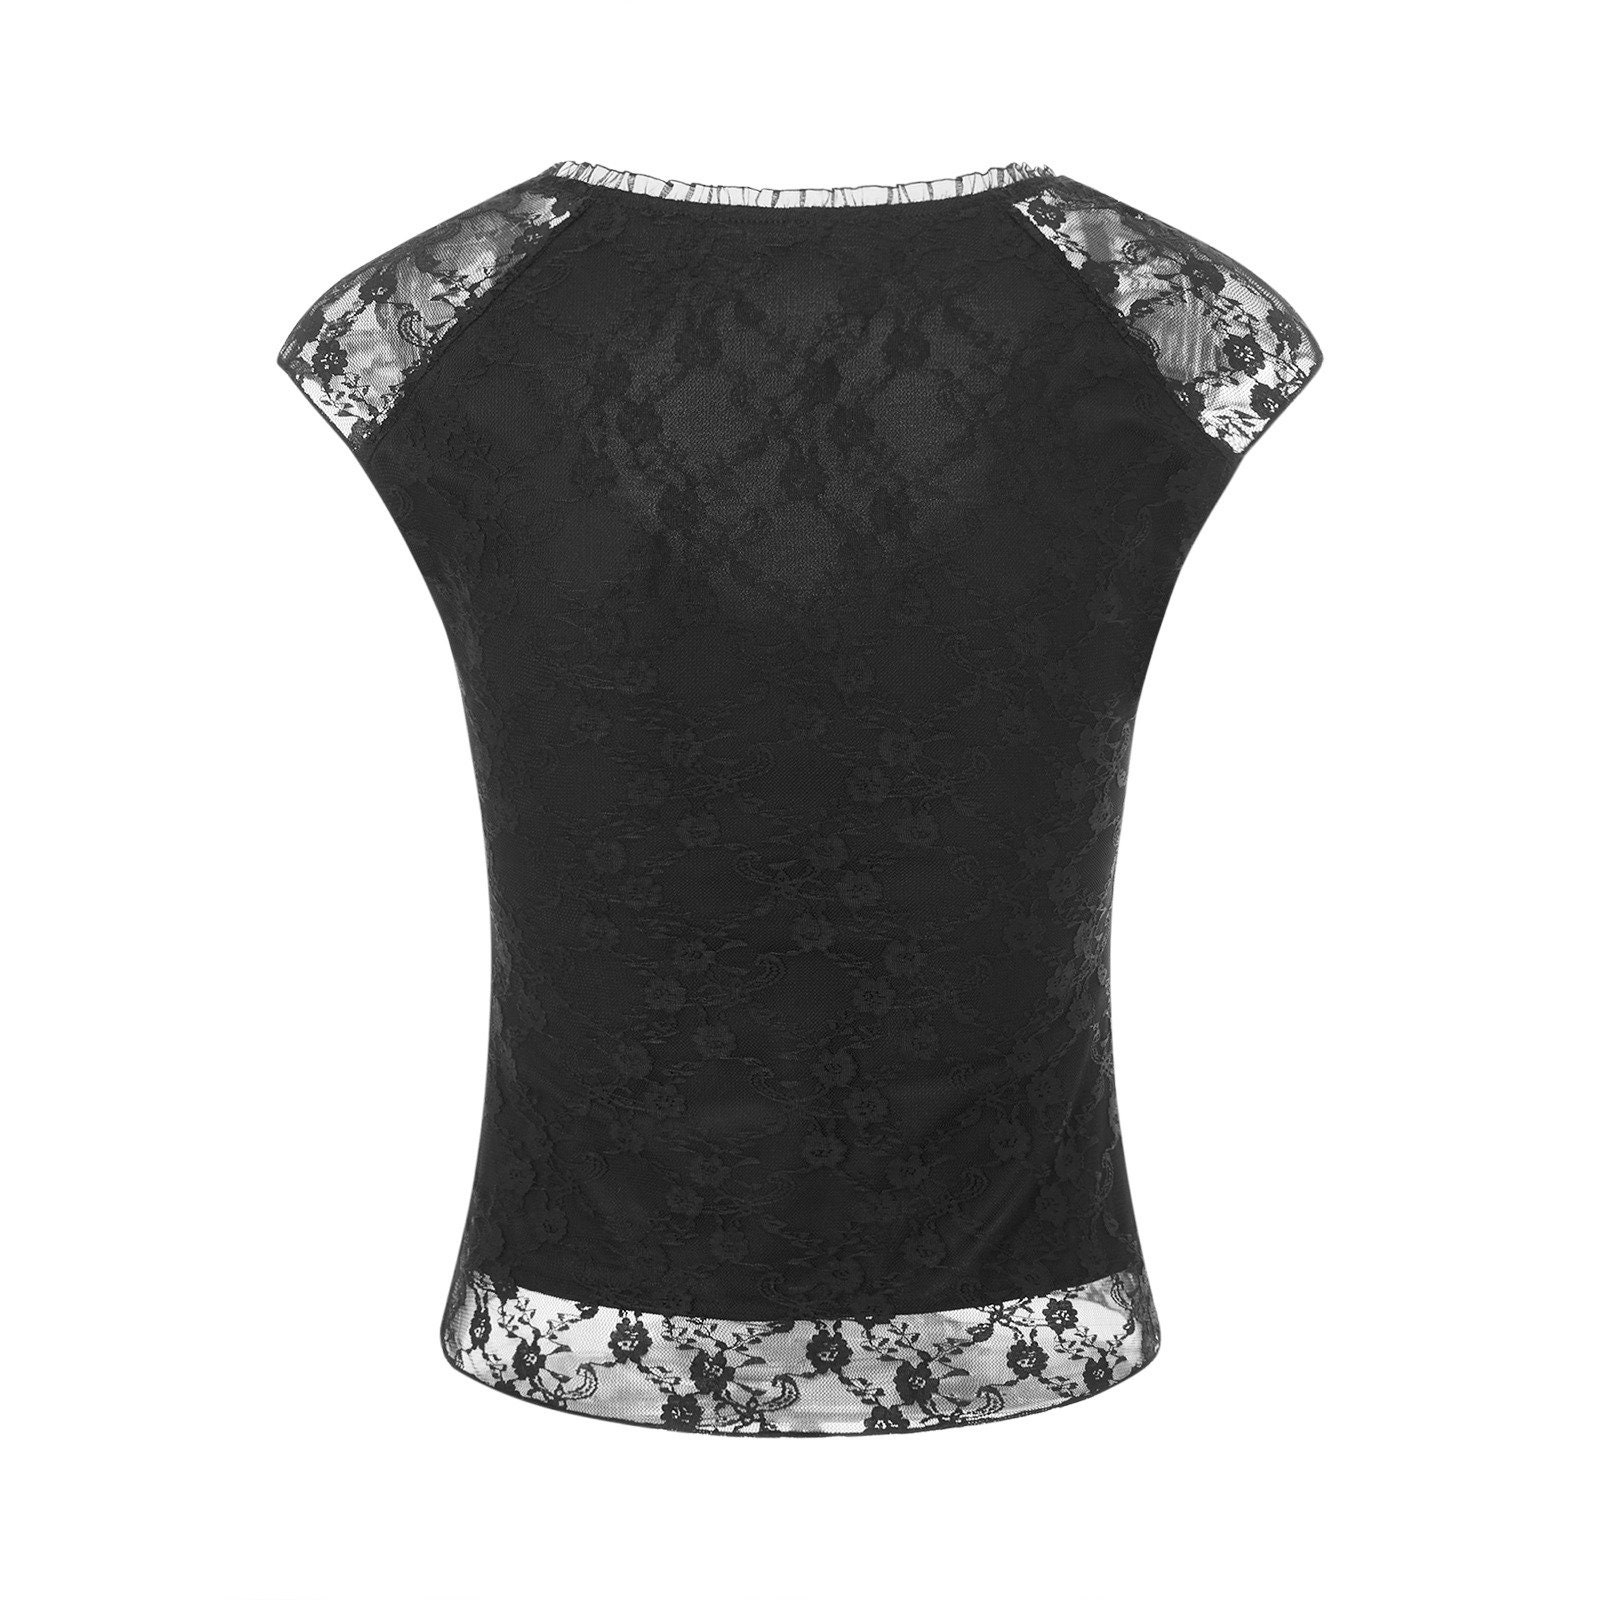 Y2K Vintage Lace T-shirt: Retro-inspired fashion for a trendy and nostalgic look